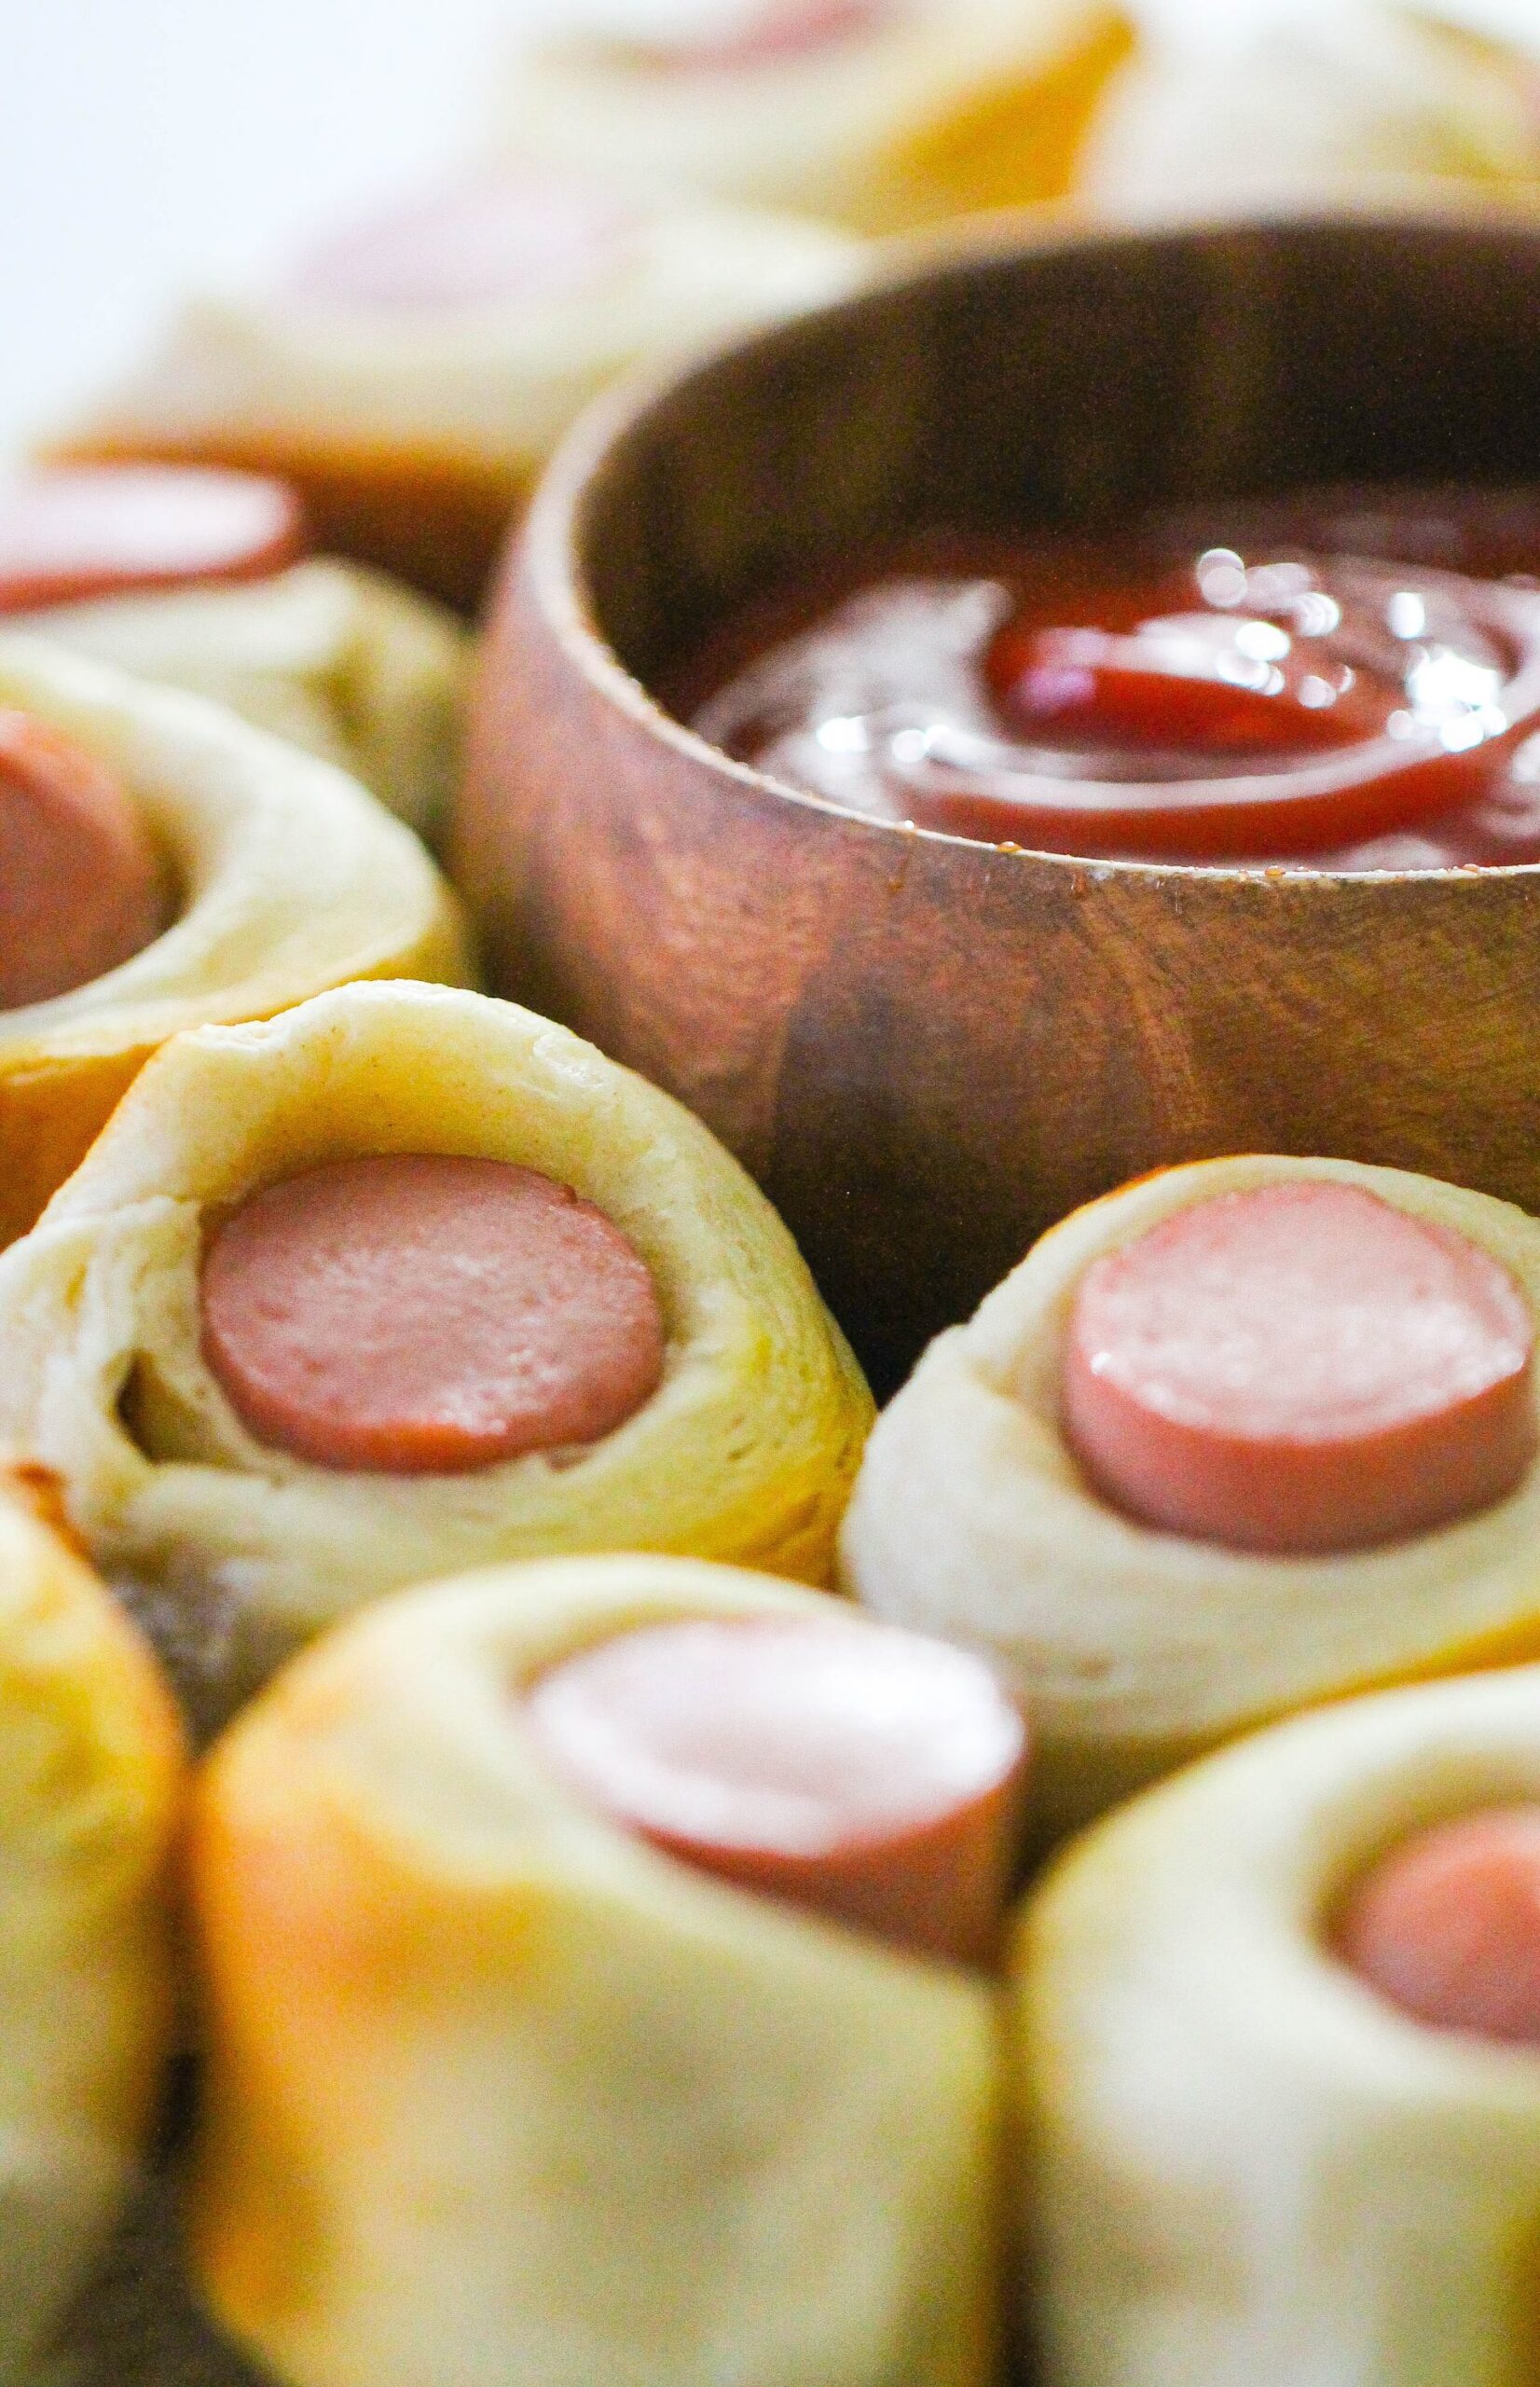 CLASSIC Pigs in a Blanket
